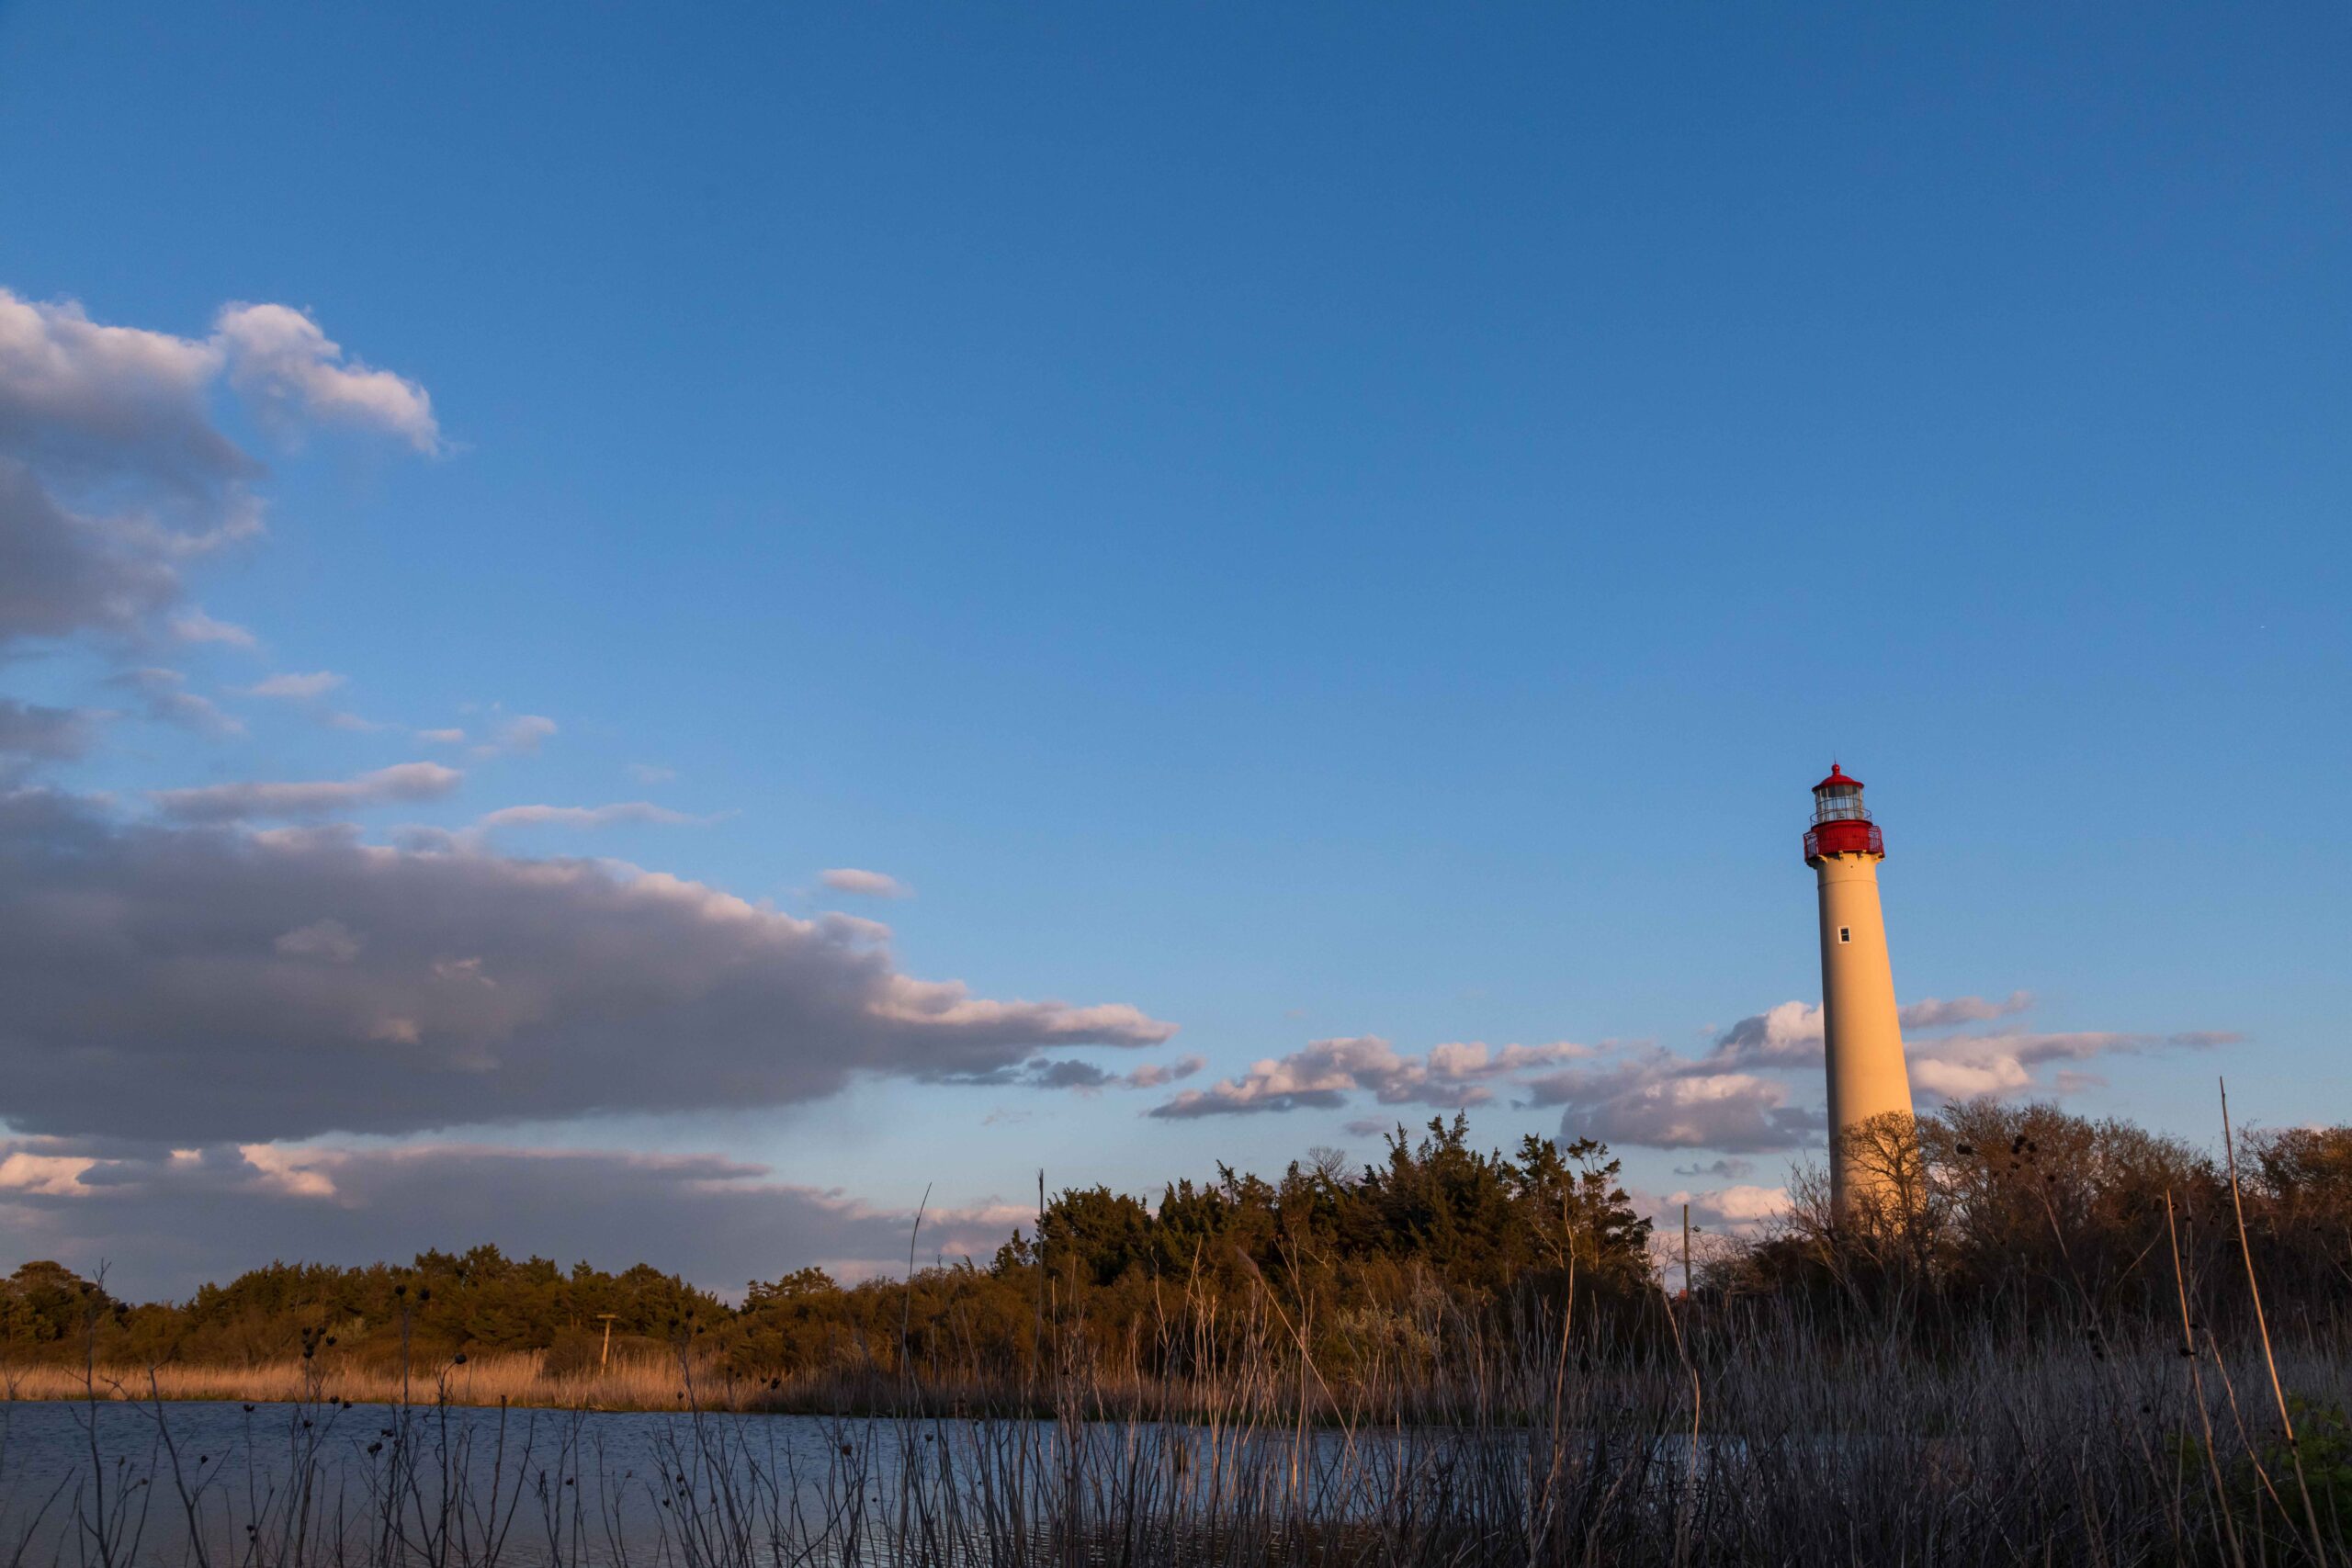 Sunlight shining on the Cape May Lighthouse at sunset with some clouds in a blue sky and a lake in the foreground